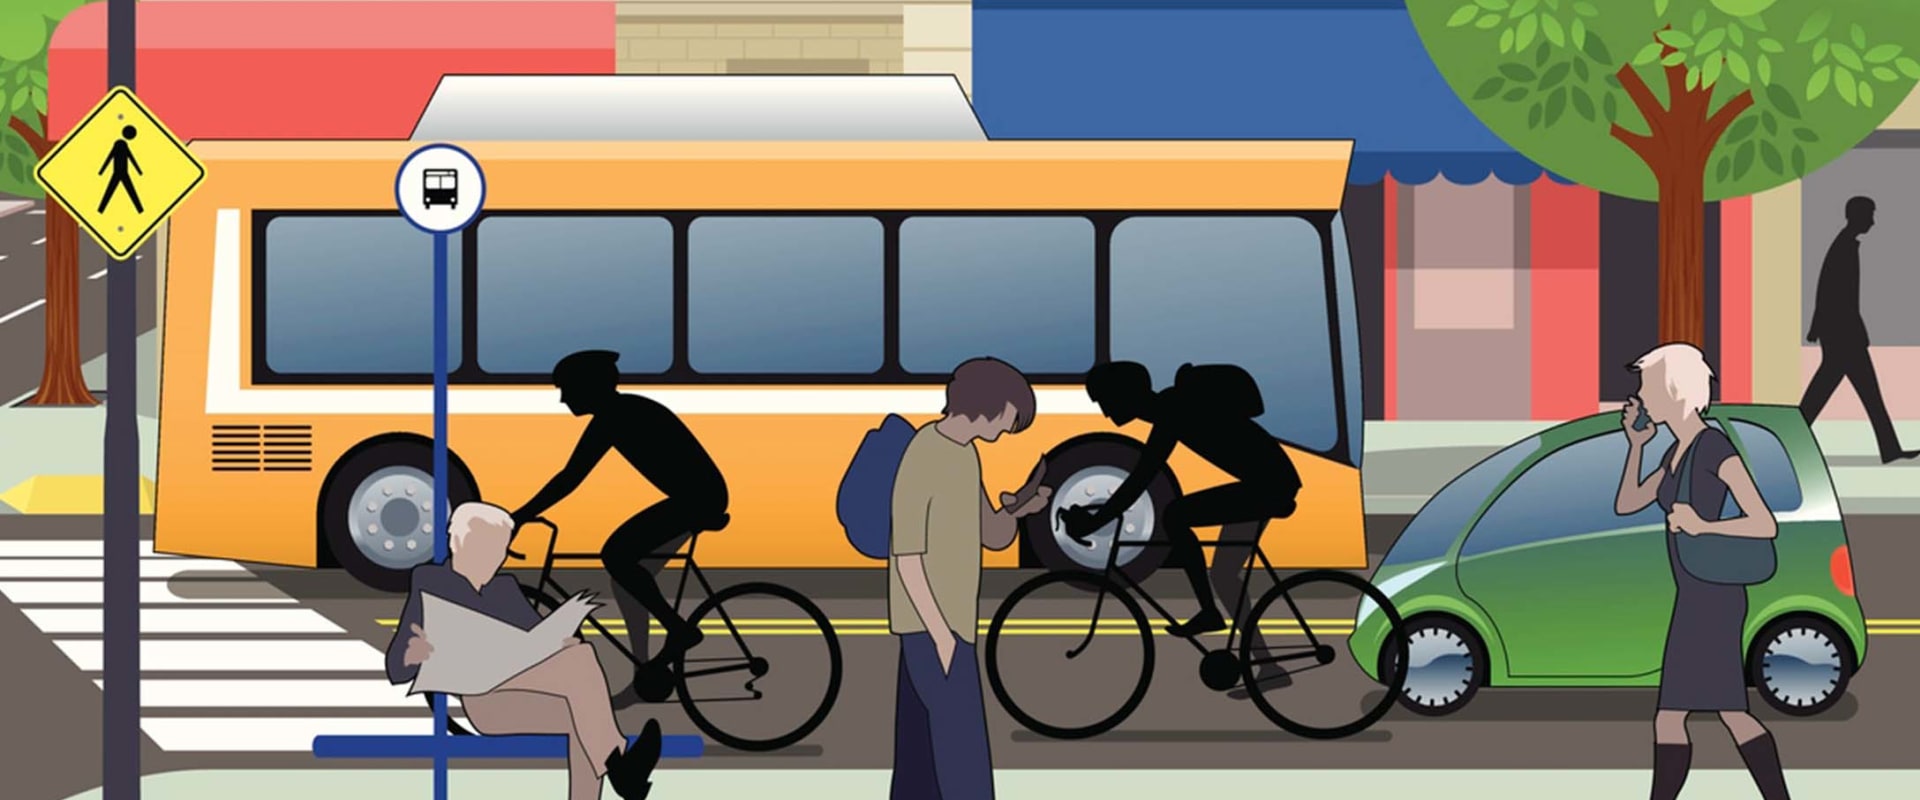 Accessibility to Public Transportation: A Guide for Small Schools